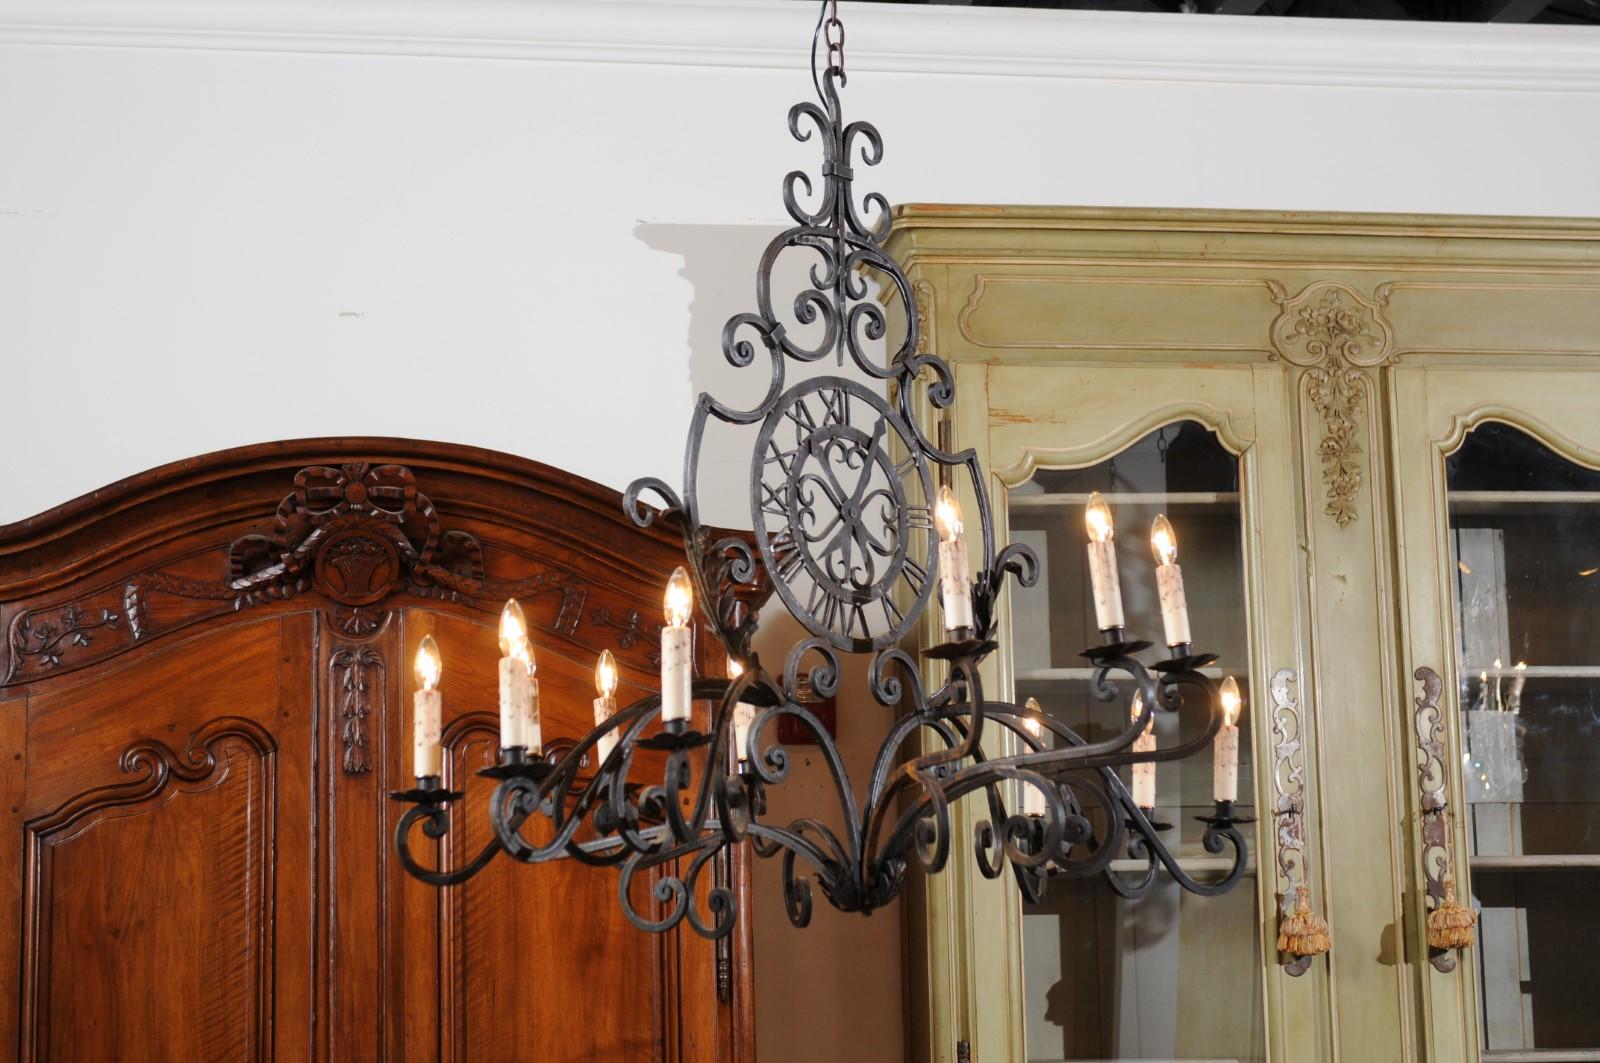 French 12-Light Wrought-Iron Chandelier with Clock Motif and Scrolling Armature For Sale 4